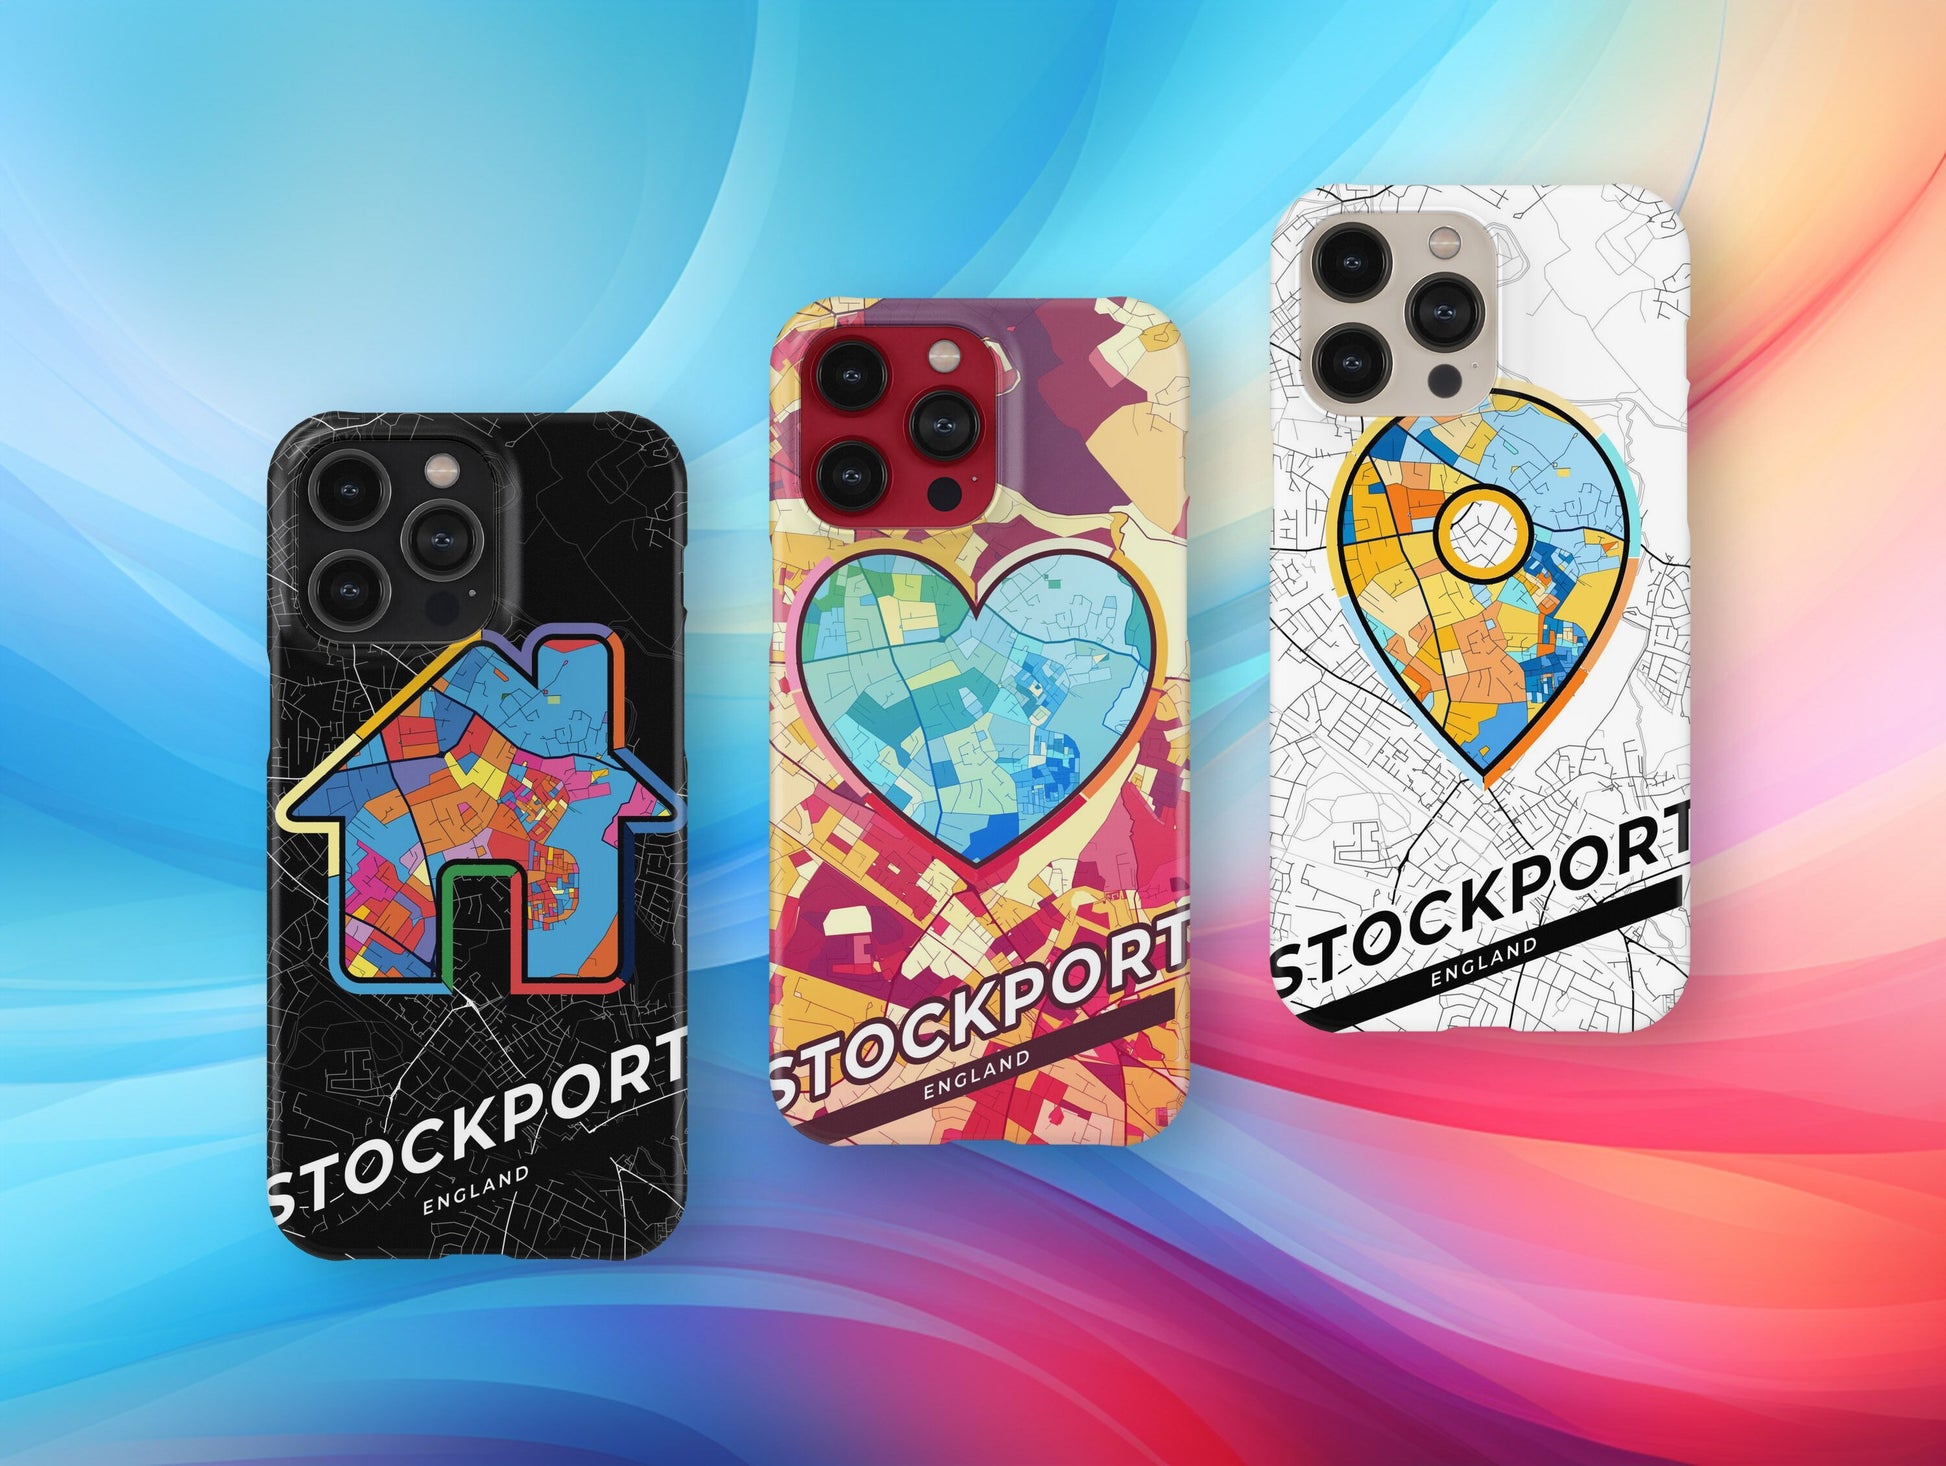 Stockport England slim phone case with colorful icon